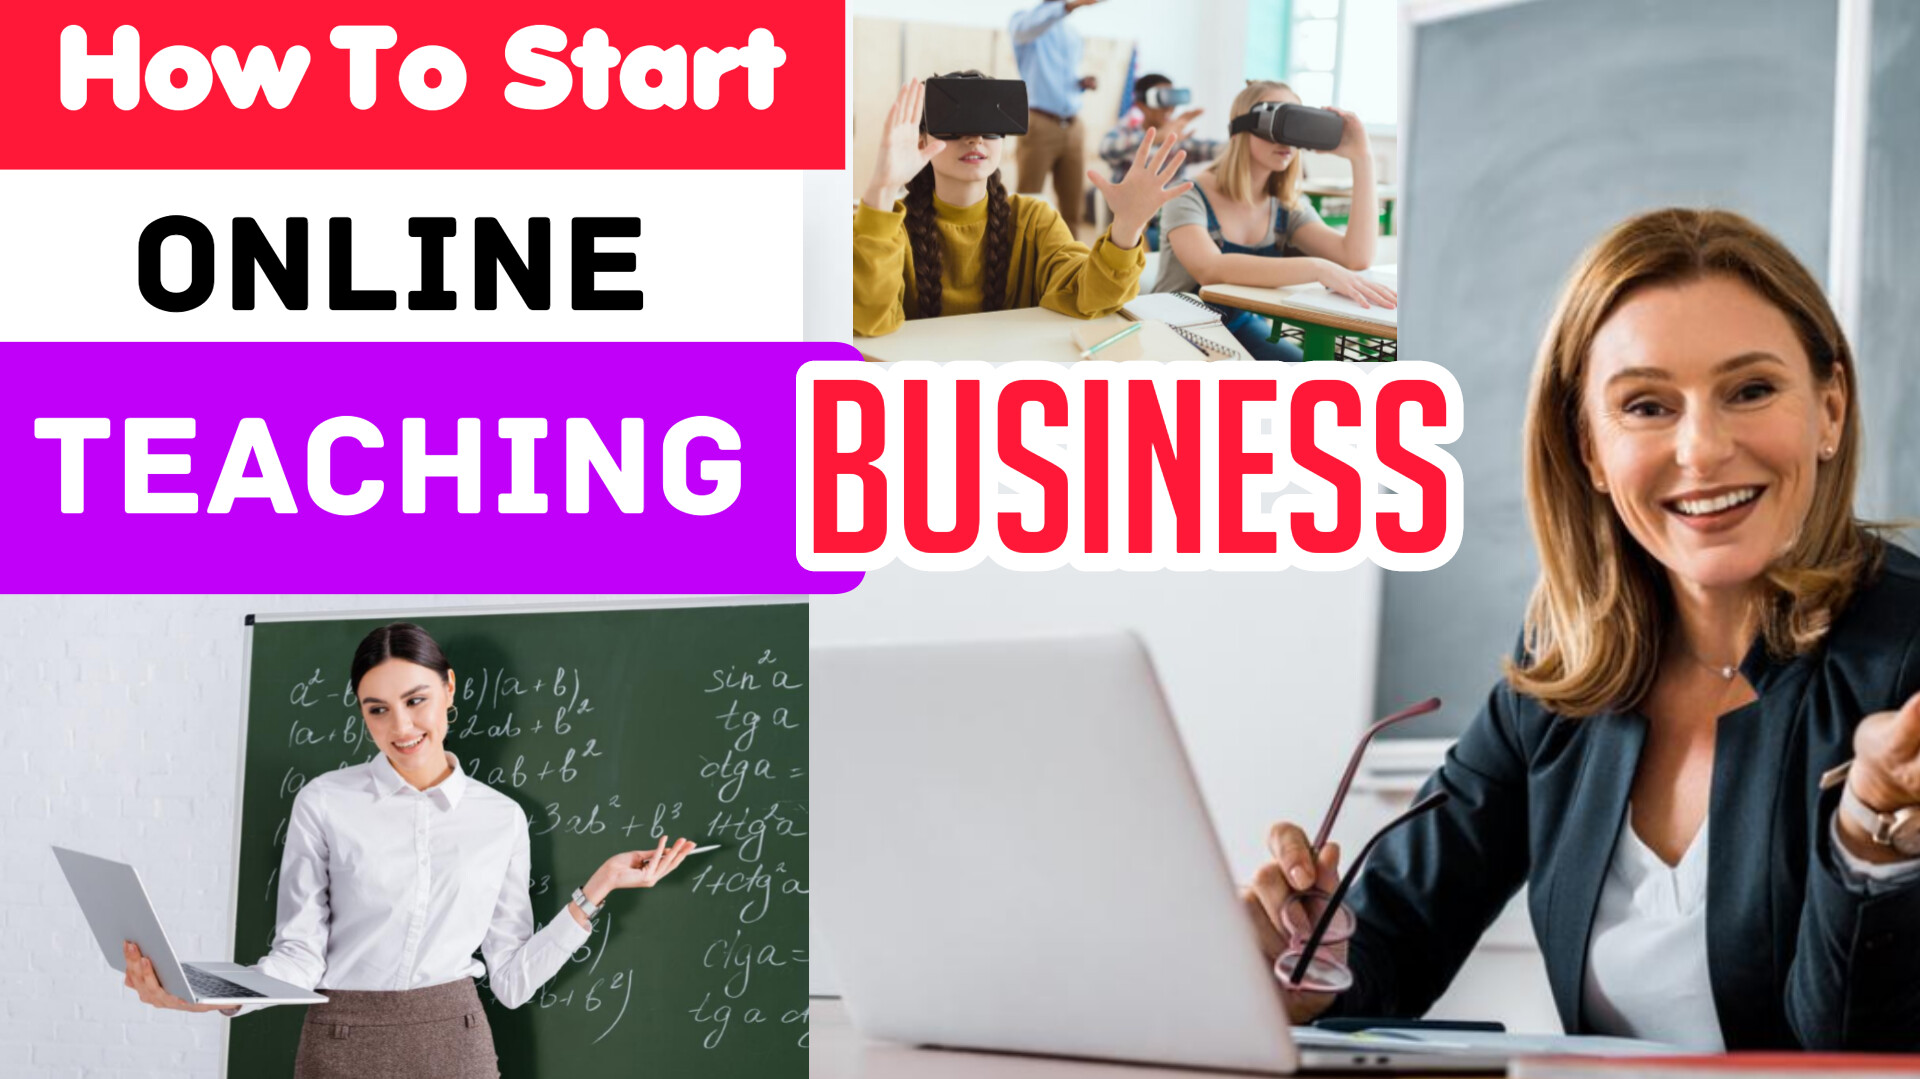 How To Start A Tutoring Business | How To Start Online Teaching Business